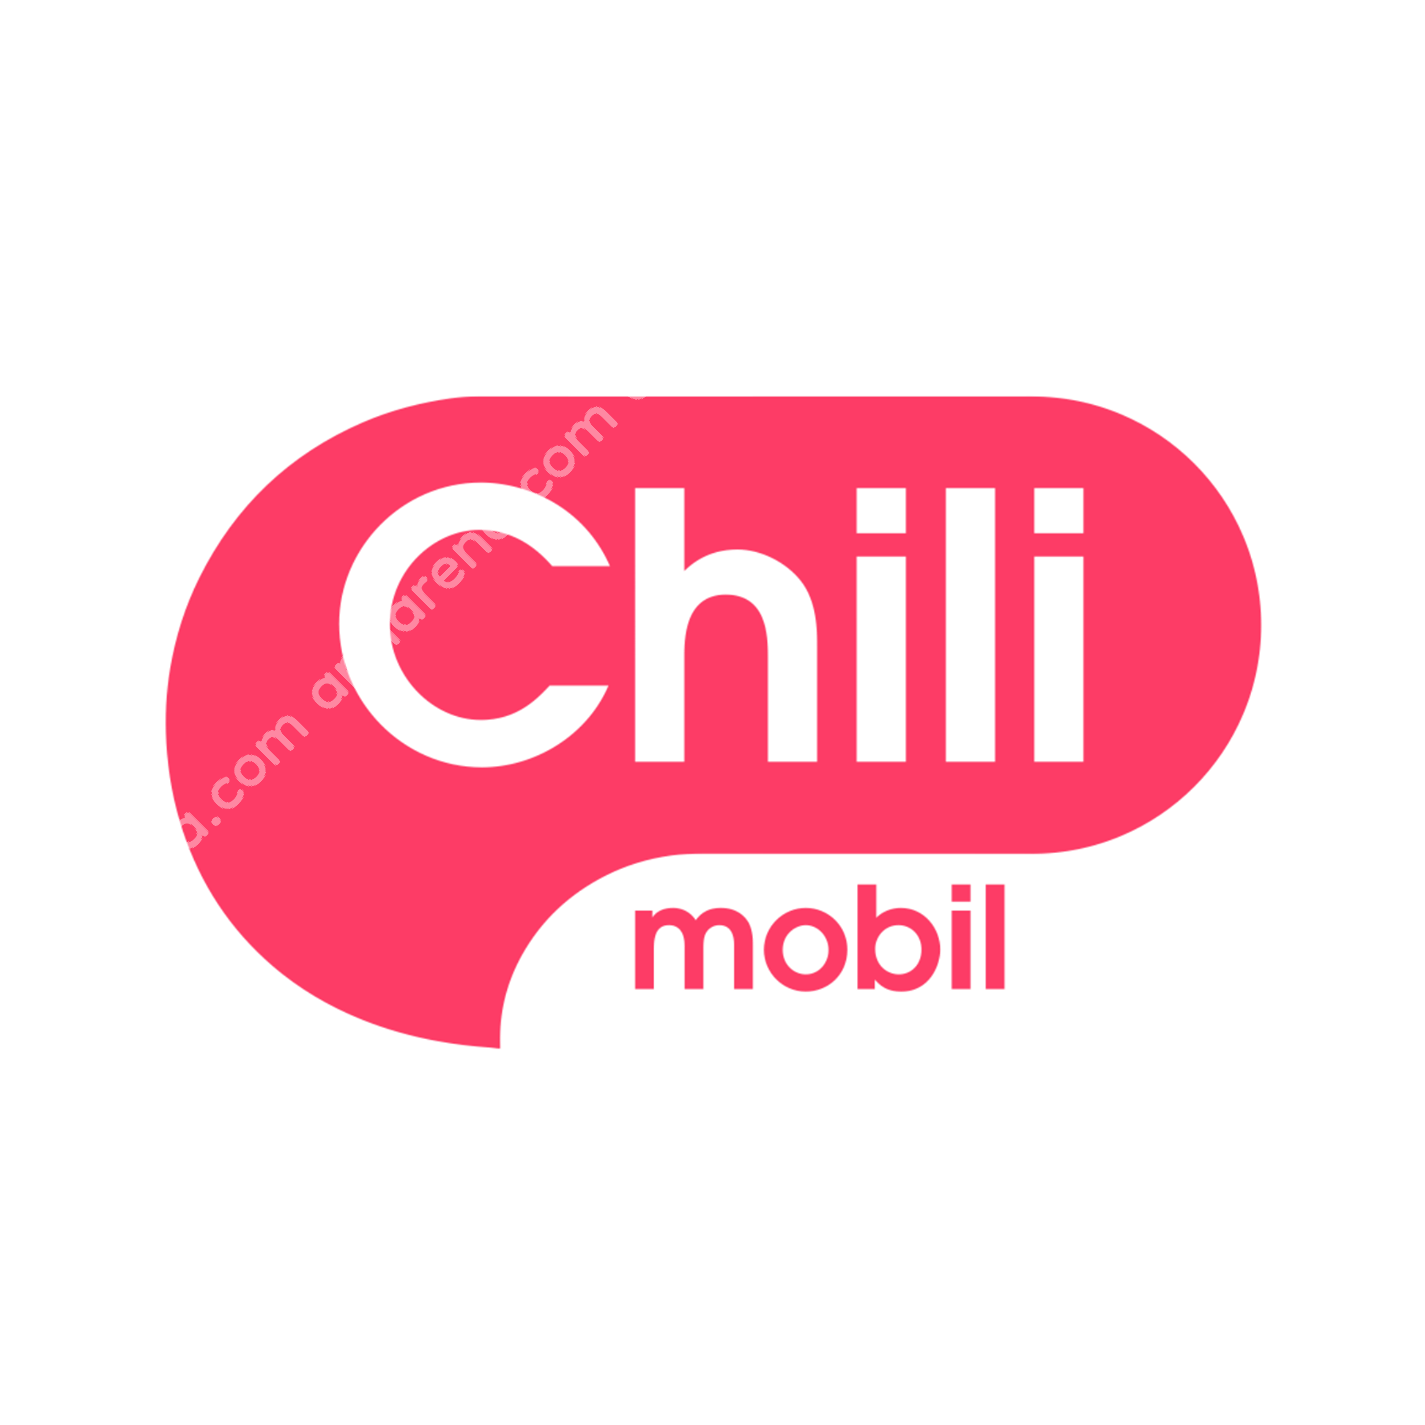 Chilimobil APN Internet Settings Android iPhone